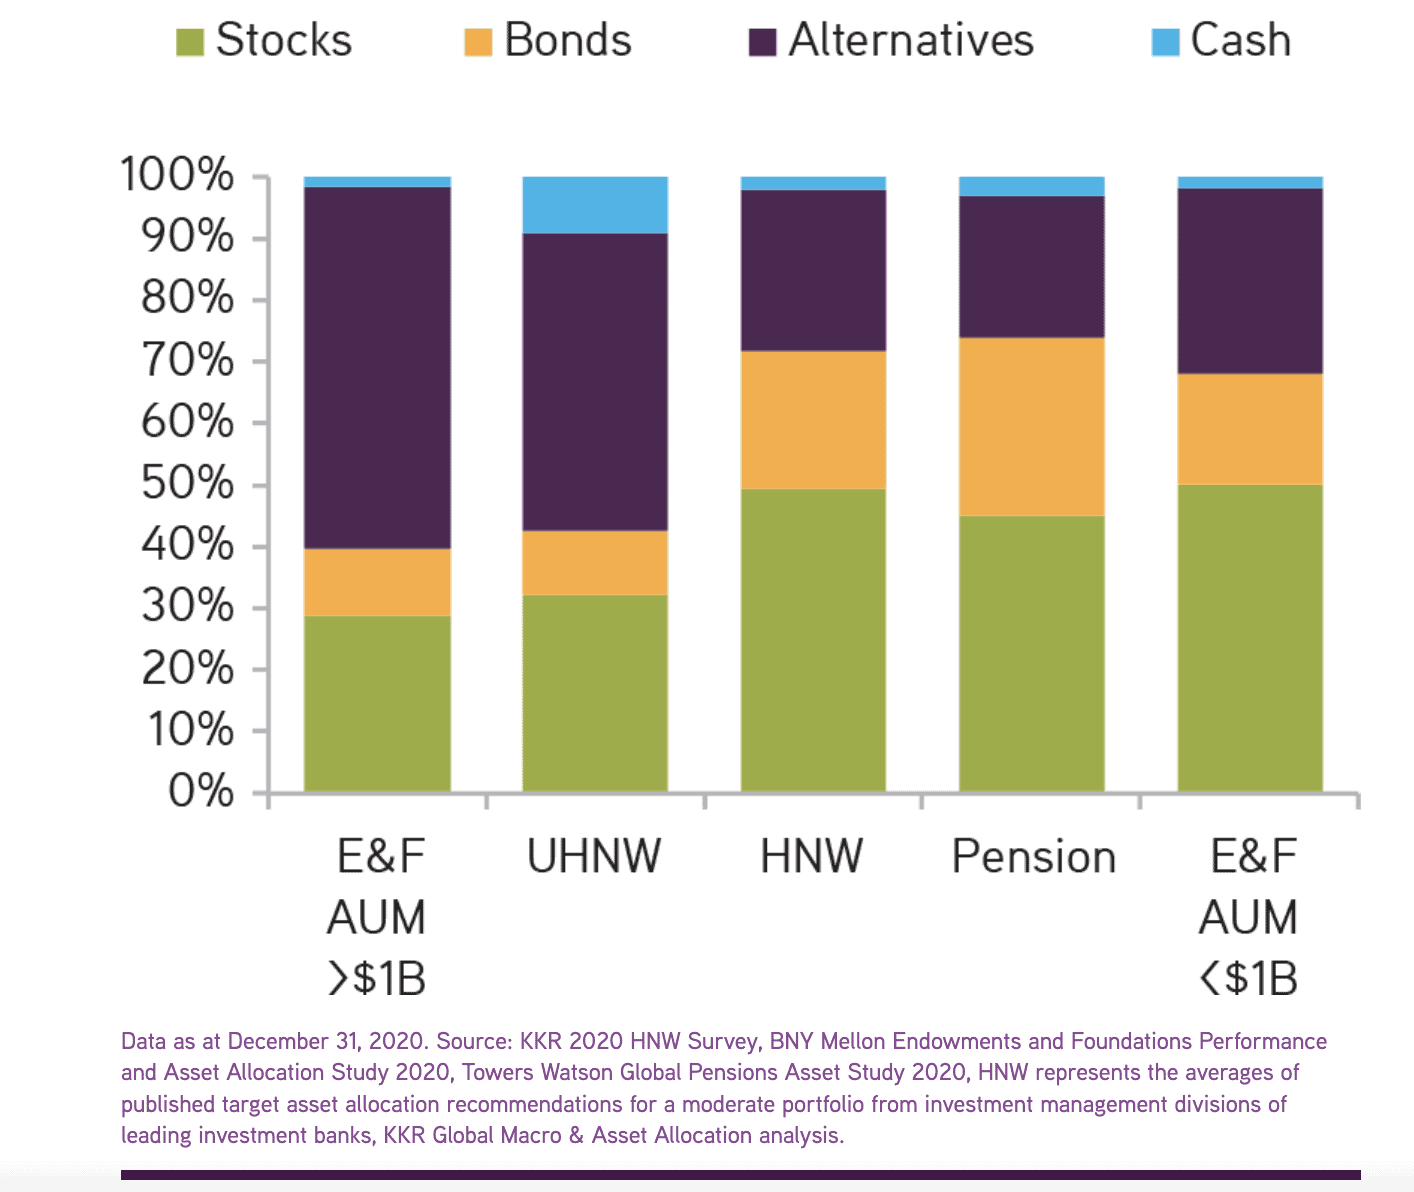 Bar chart showing allocation to stocks, bonds, alternatives, and cash by investor type. 